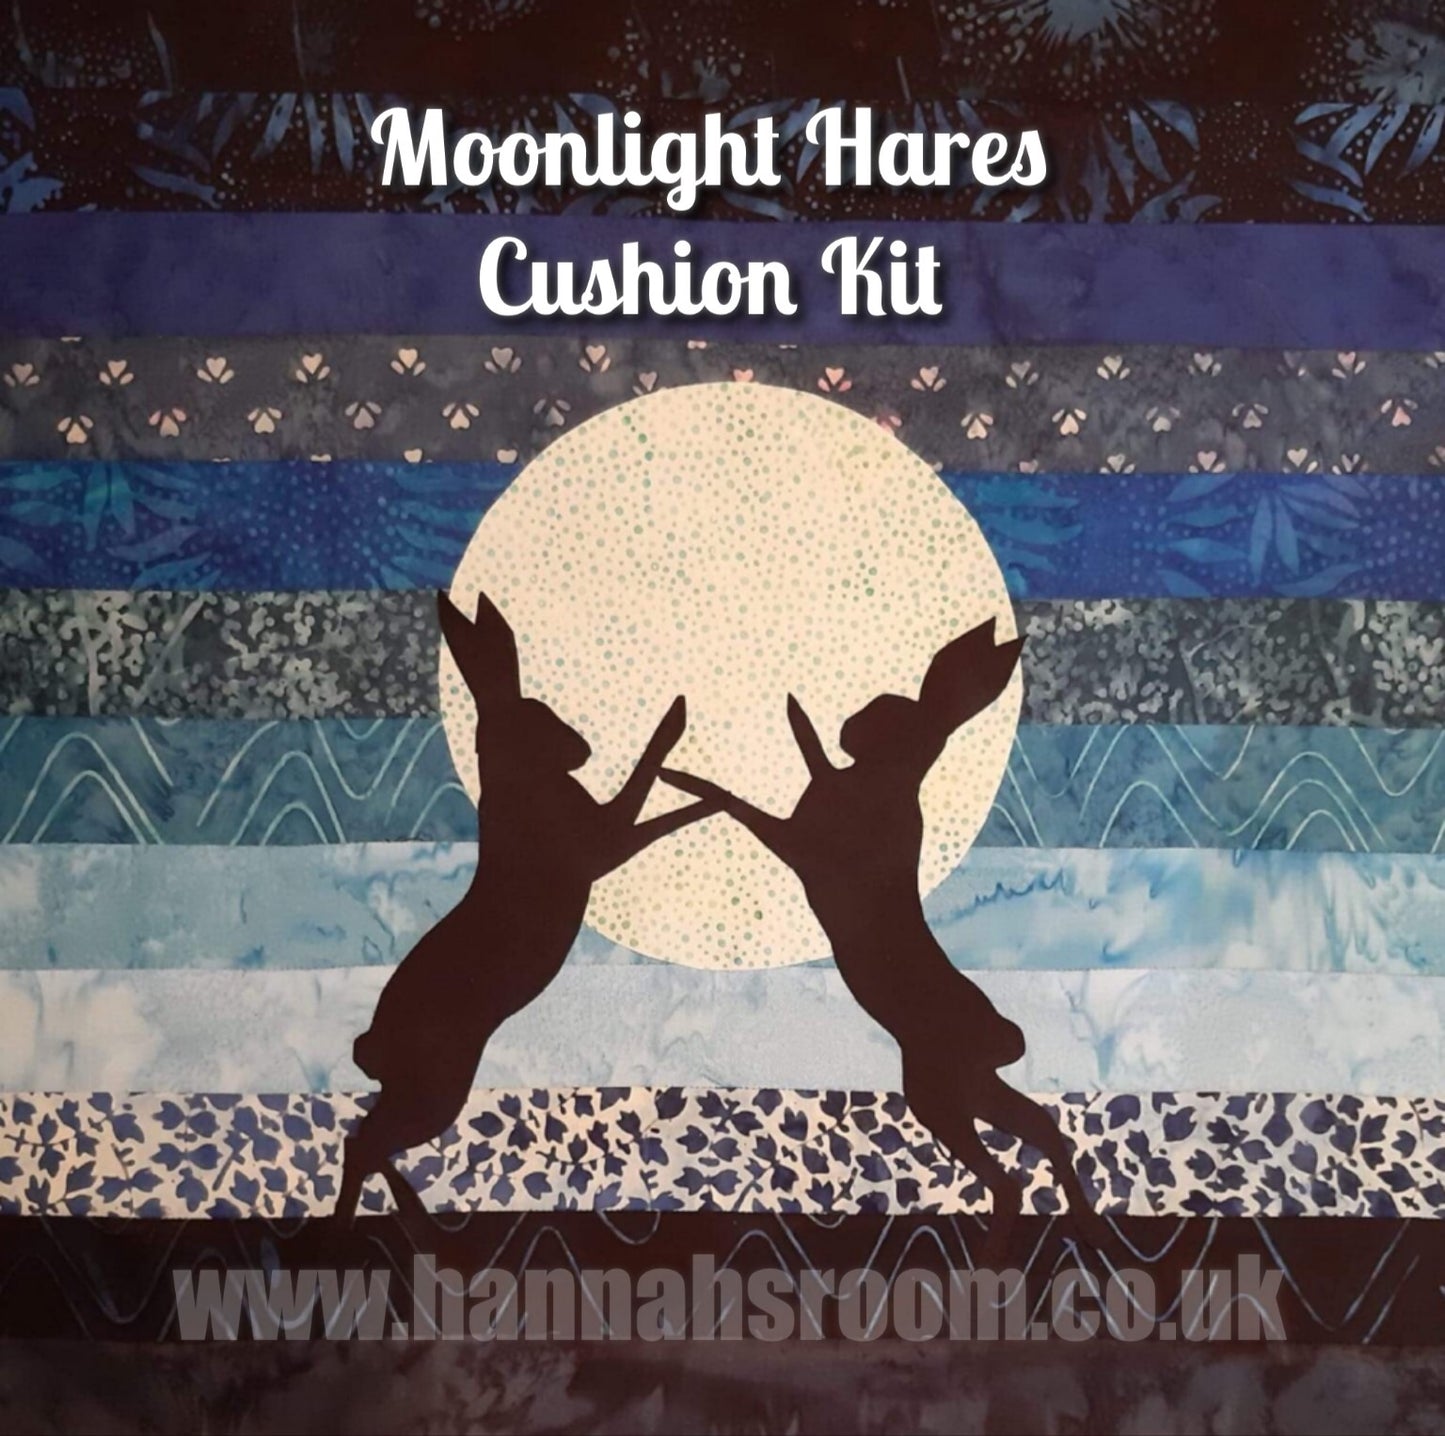 Moonlight Hares Cushion Kit limited edition